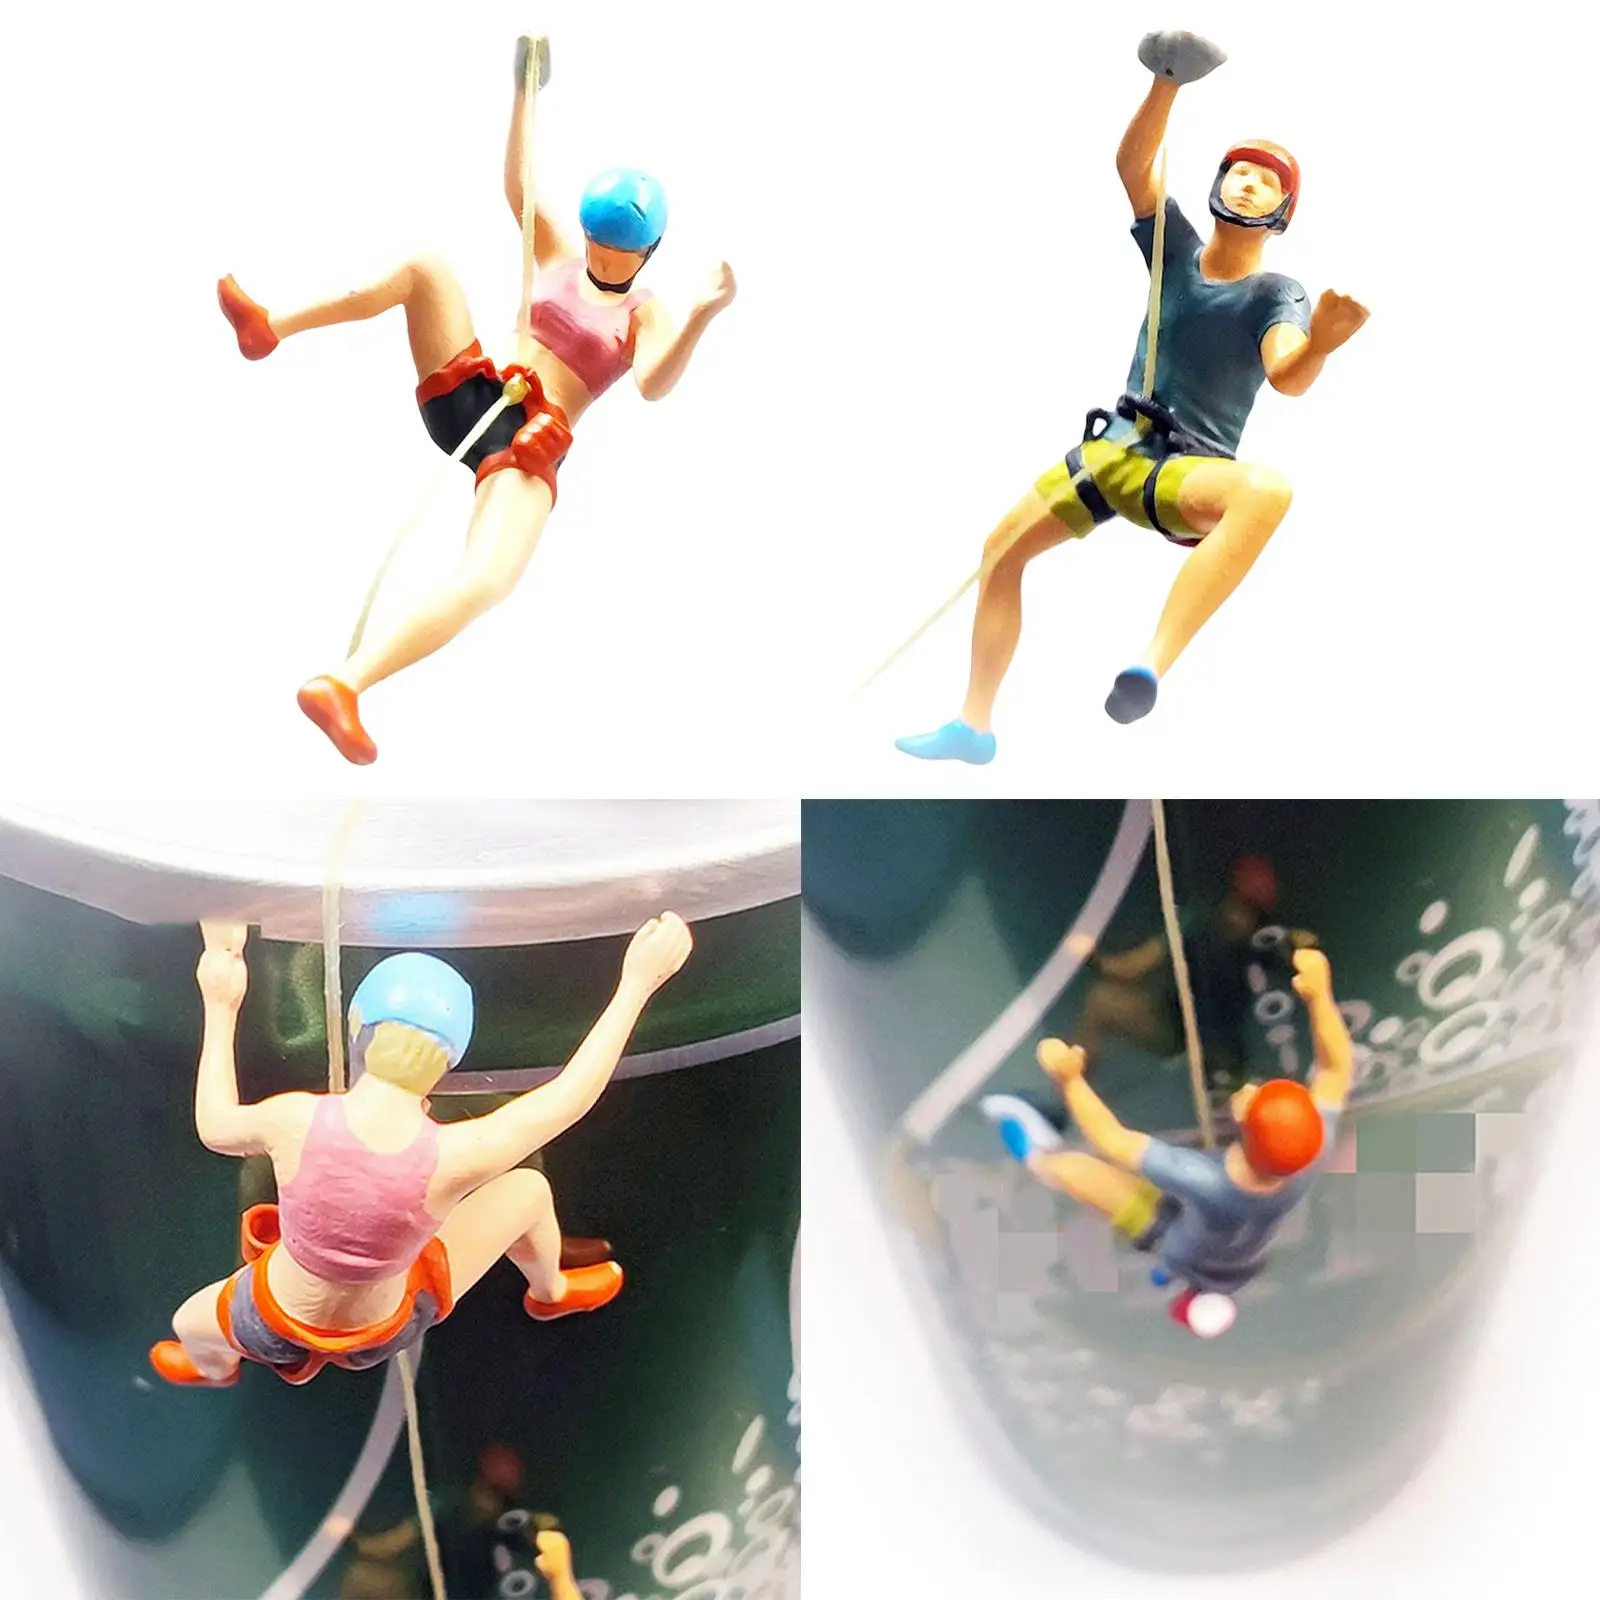 Resin Miniature Scene People Role Play Figure Mounting Climbing People Figurines for DIY Scene DIY Projects Diorama Sand Table